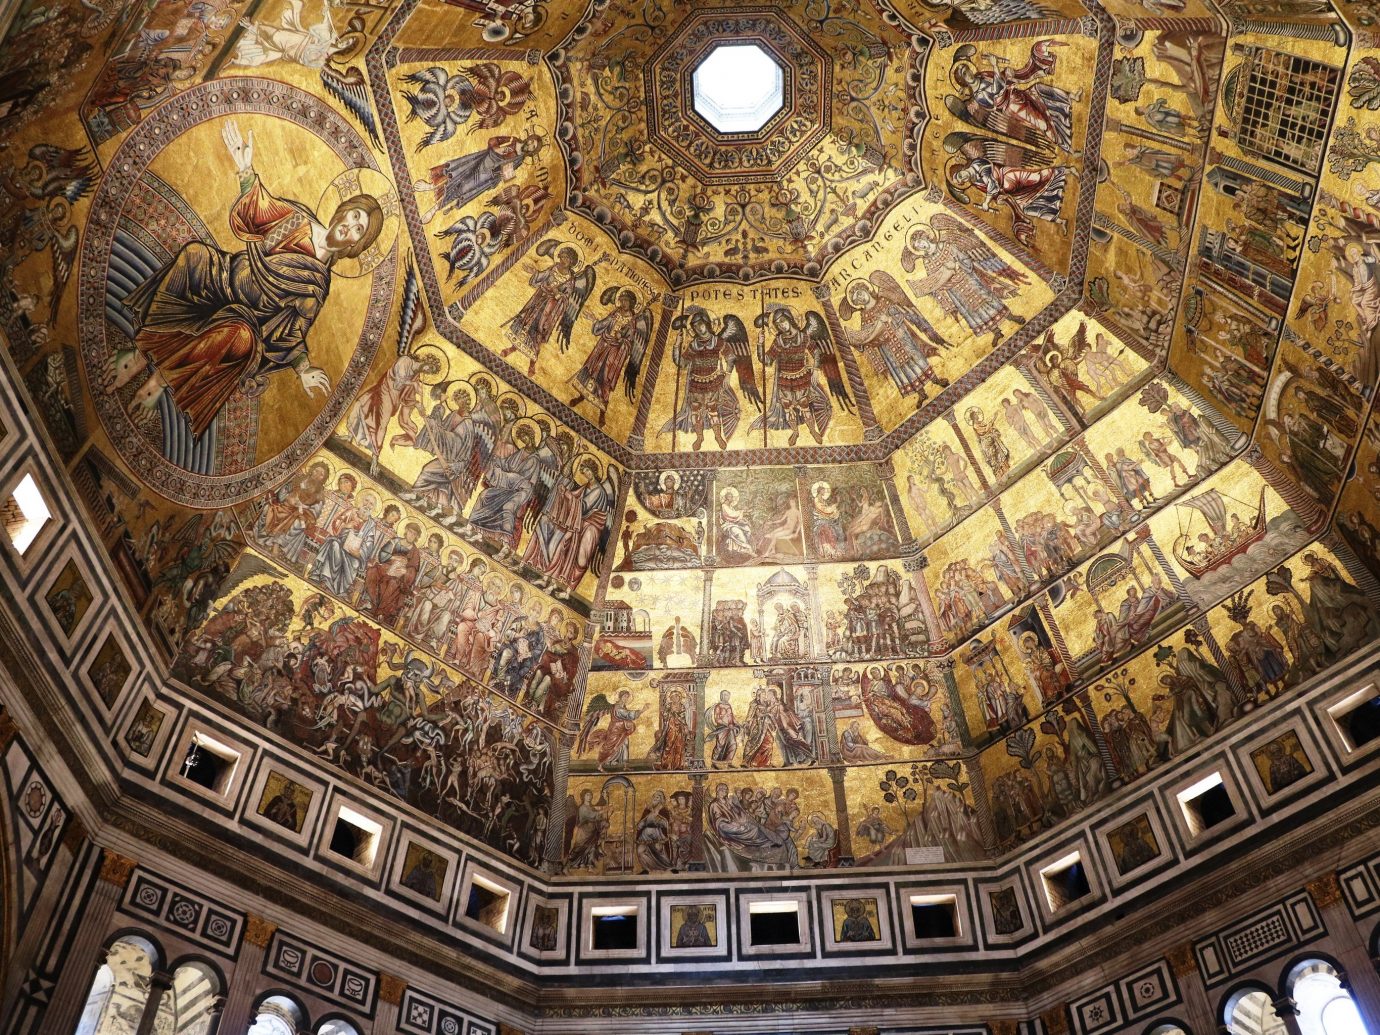 Trip Ideas indoor dome building basilica byzantine architecture ancient rome ancient history baptistery cathedral place of worship symmetry Church